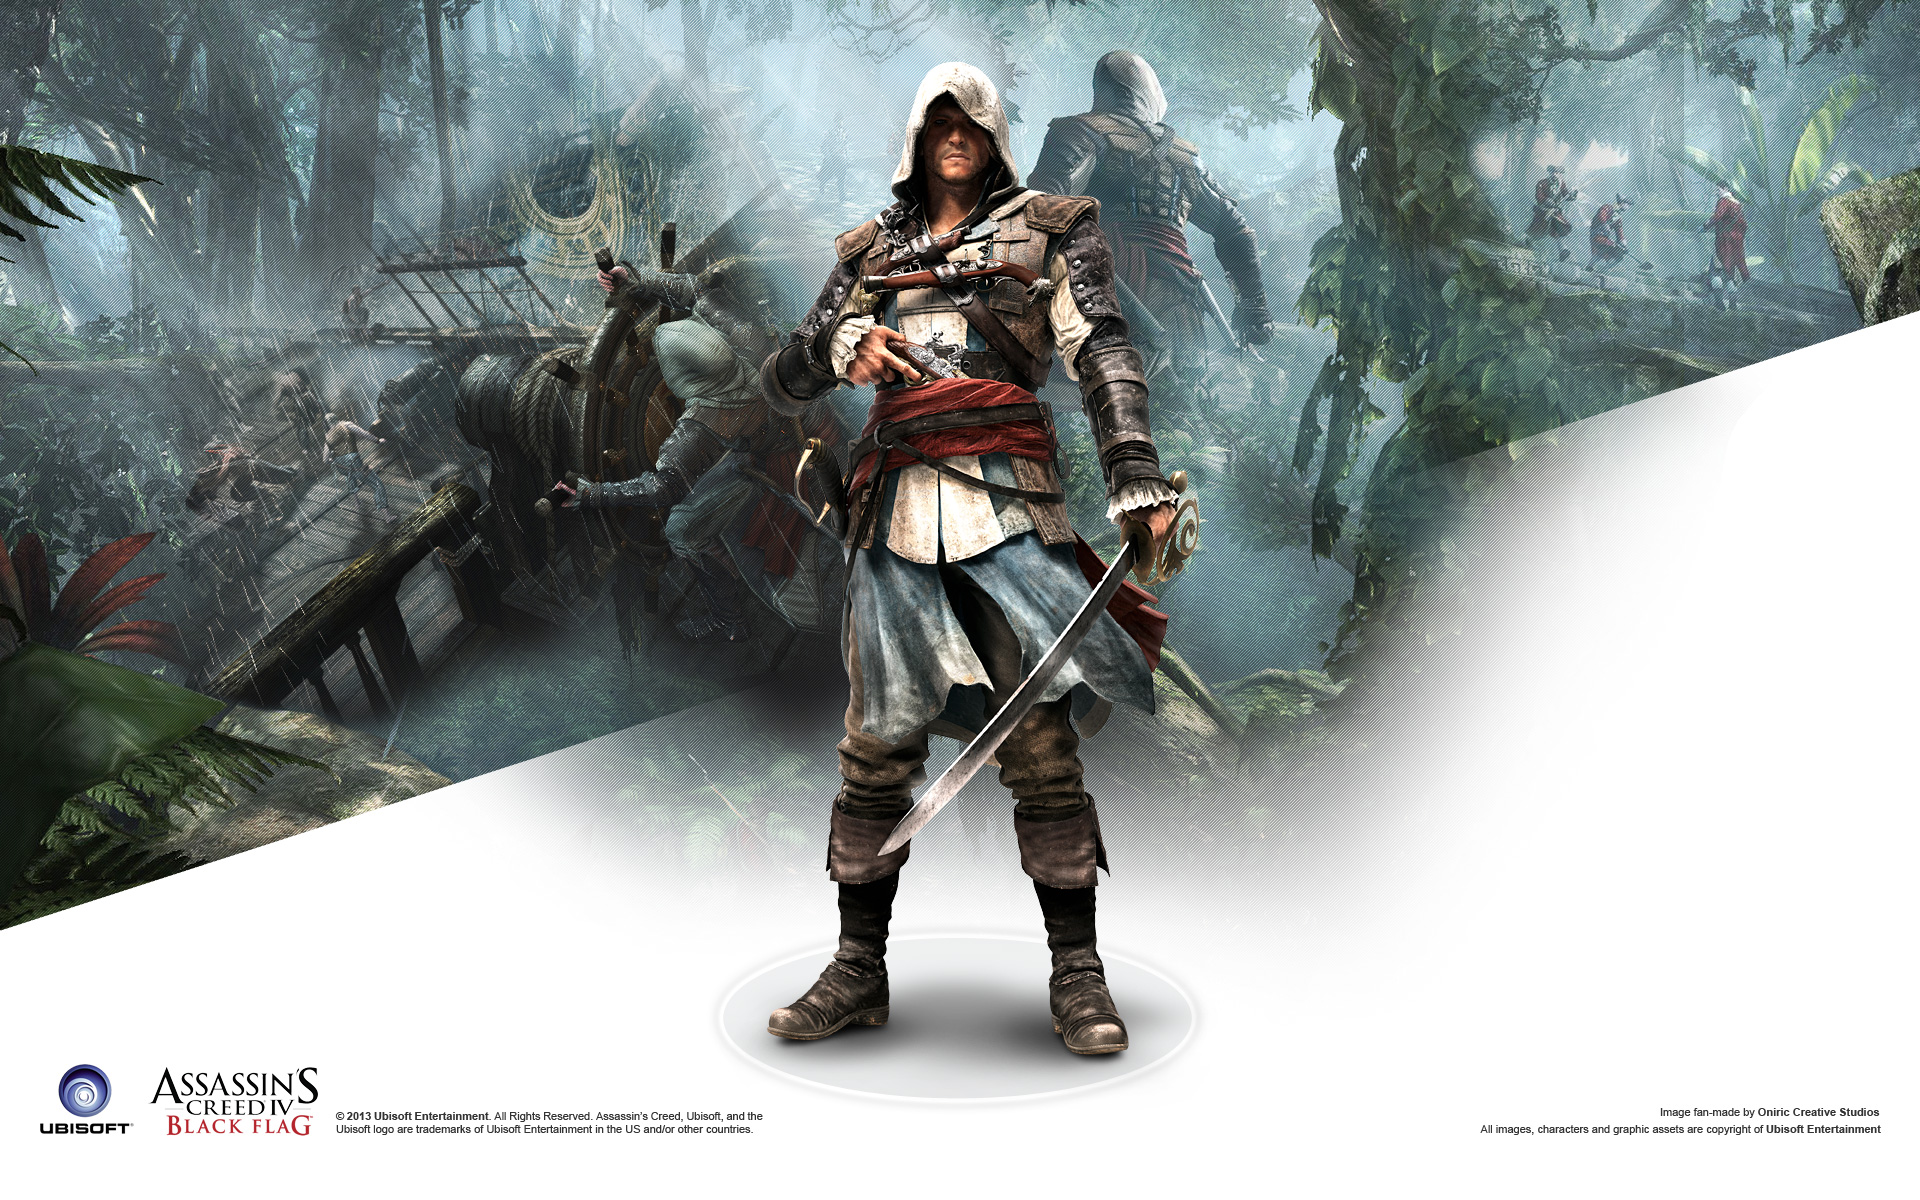 assassins creed iv black flag wallpapers Wallpapers